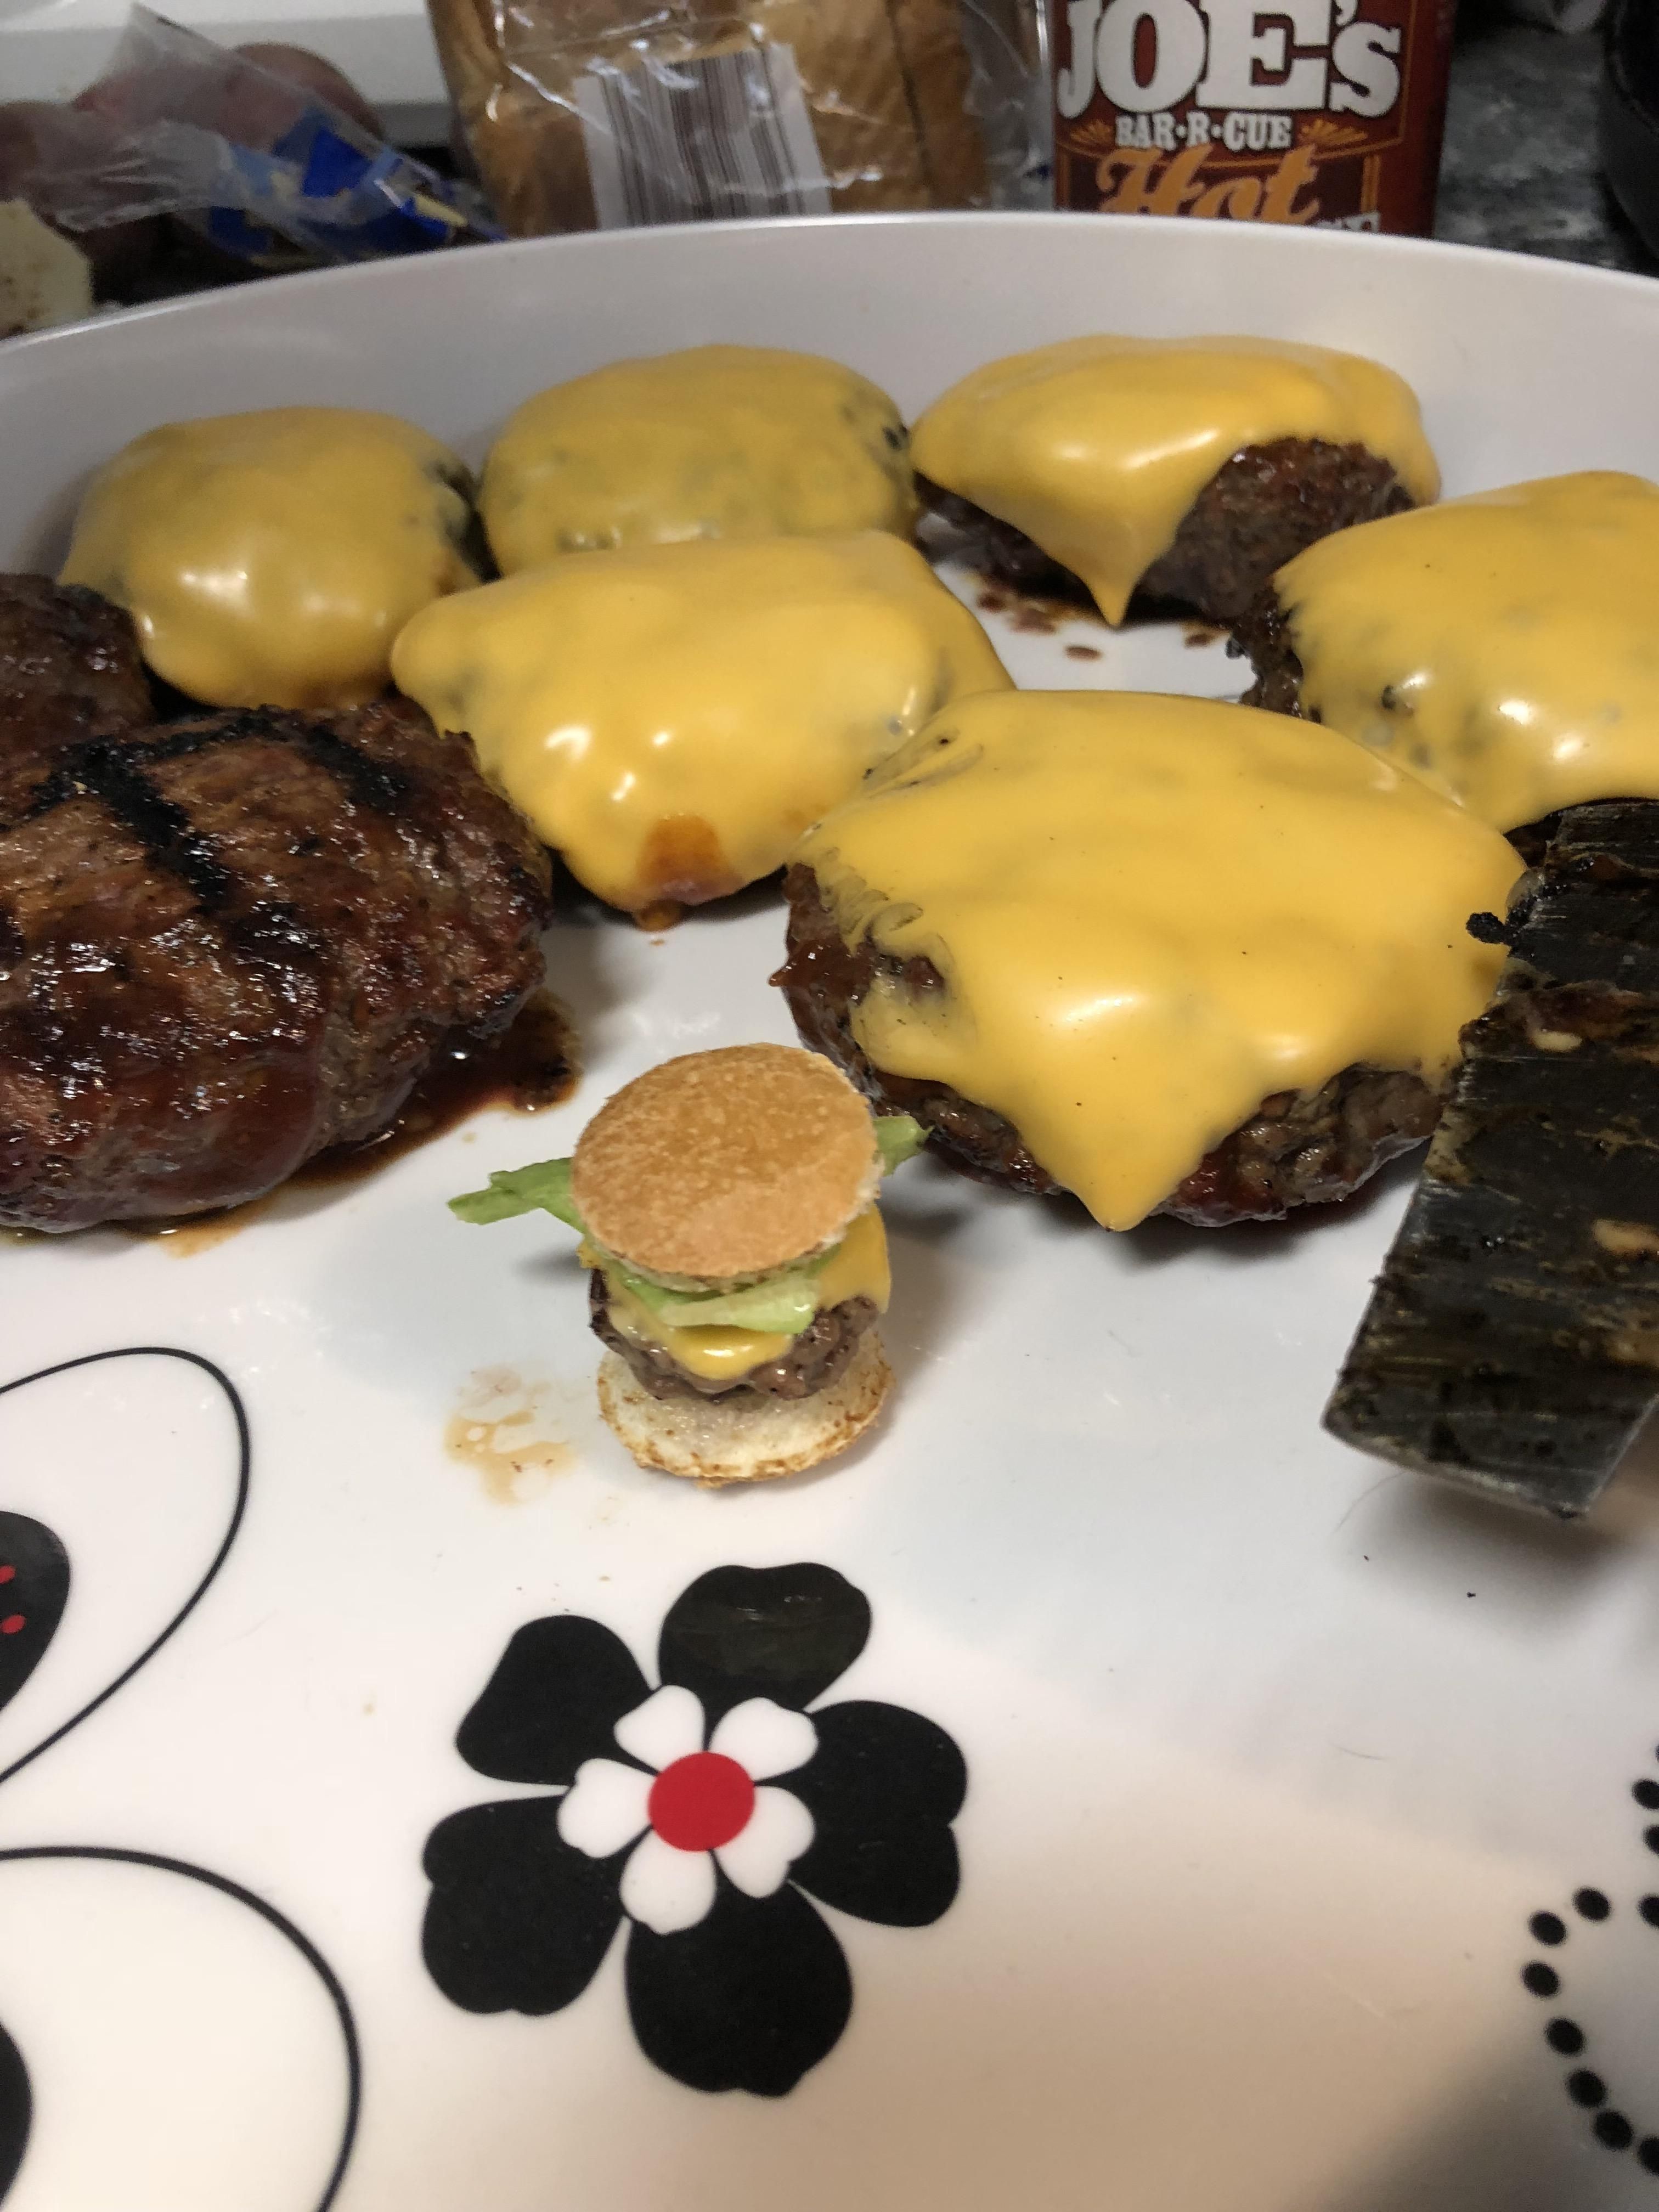 My daughter wanted me to grill a cheeseburger for our small dog.